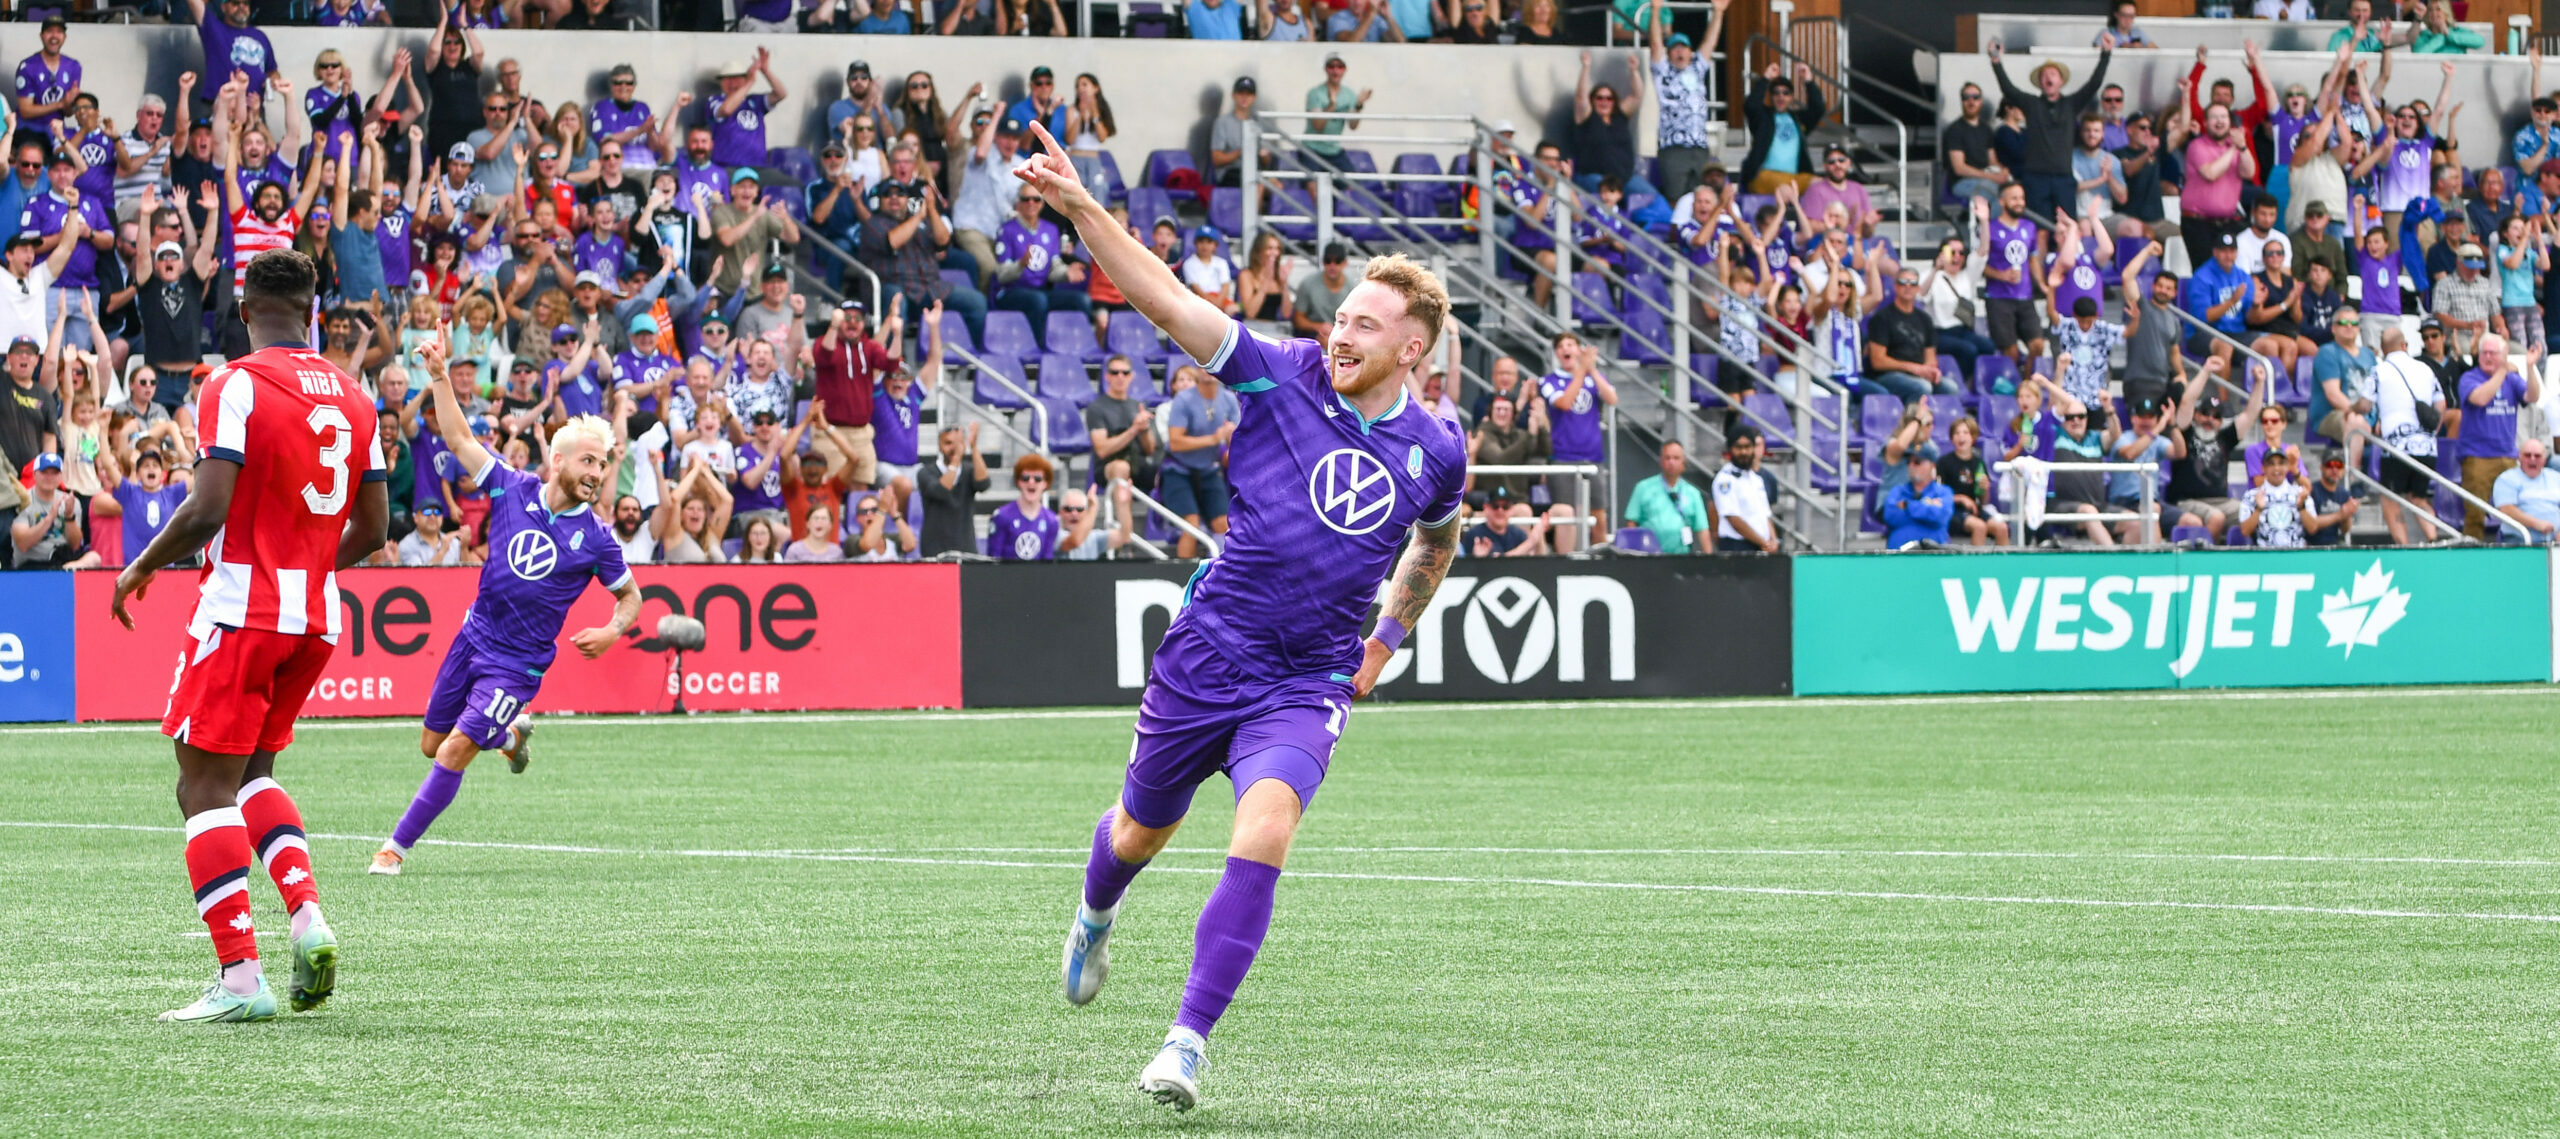 Photo of Josh Heard celebrating a goal for Pacific FC in the Canadian Premier League